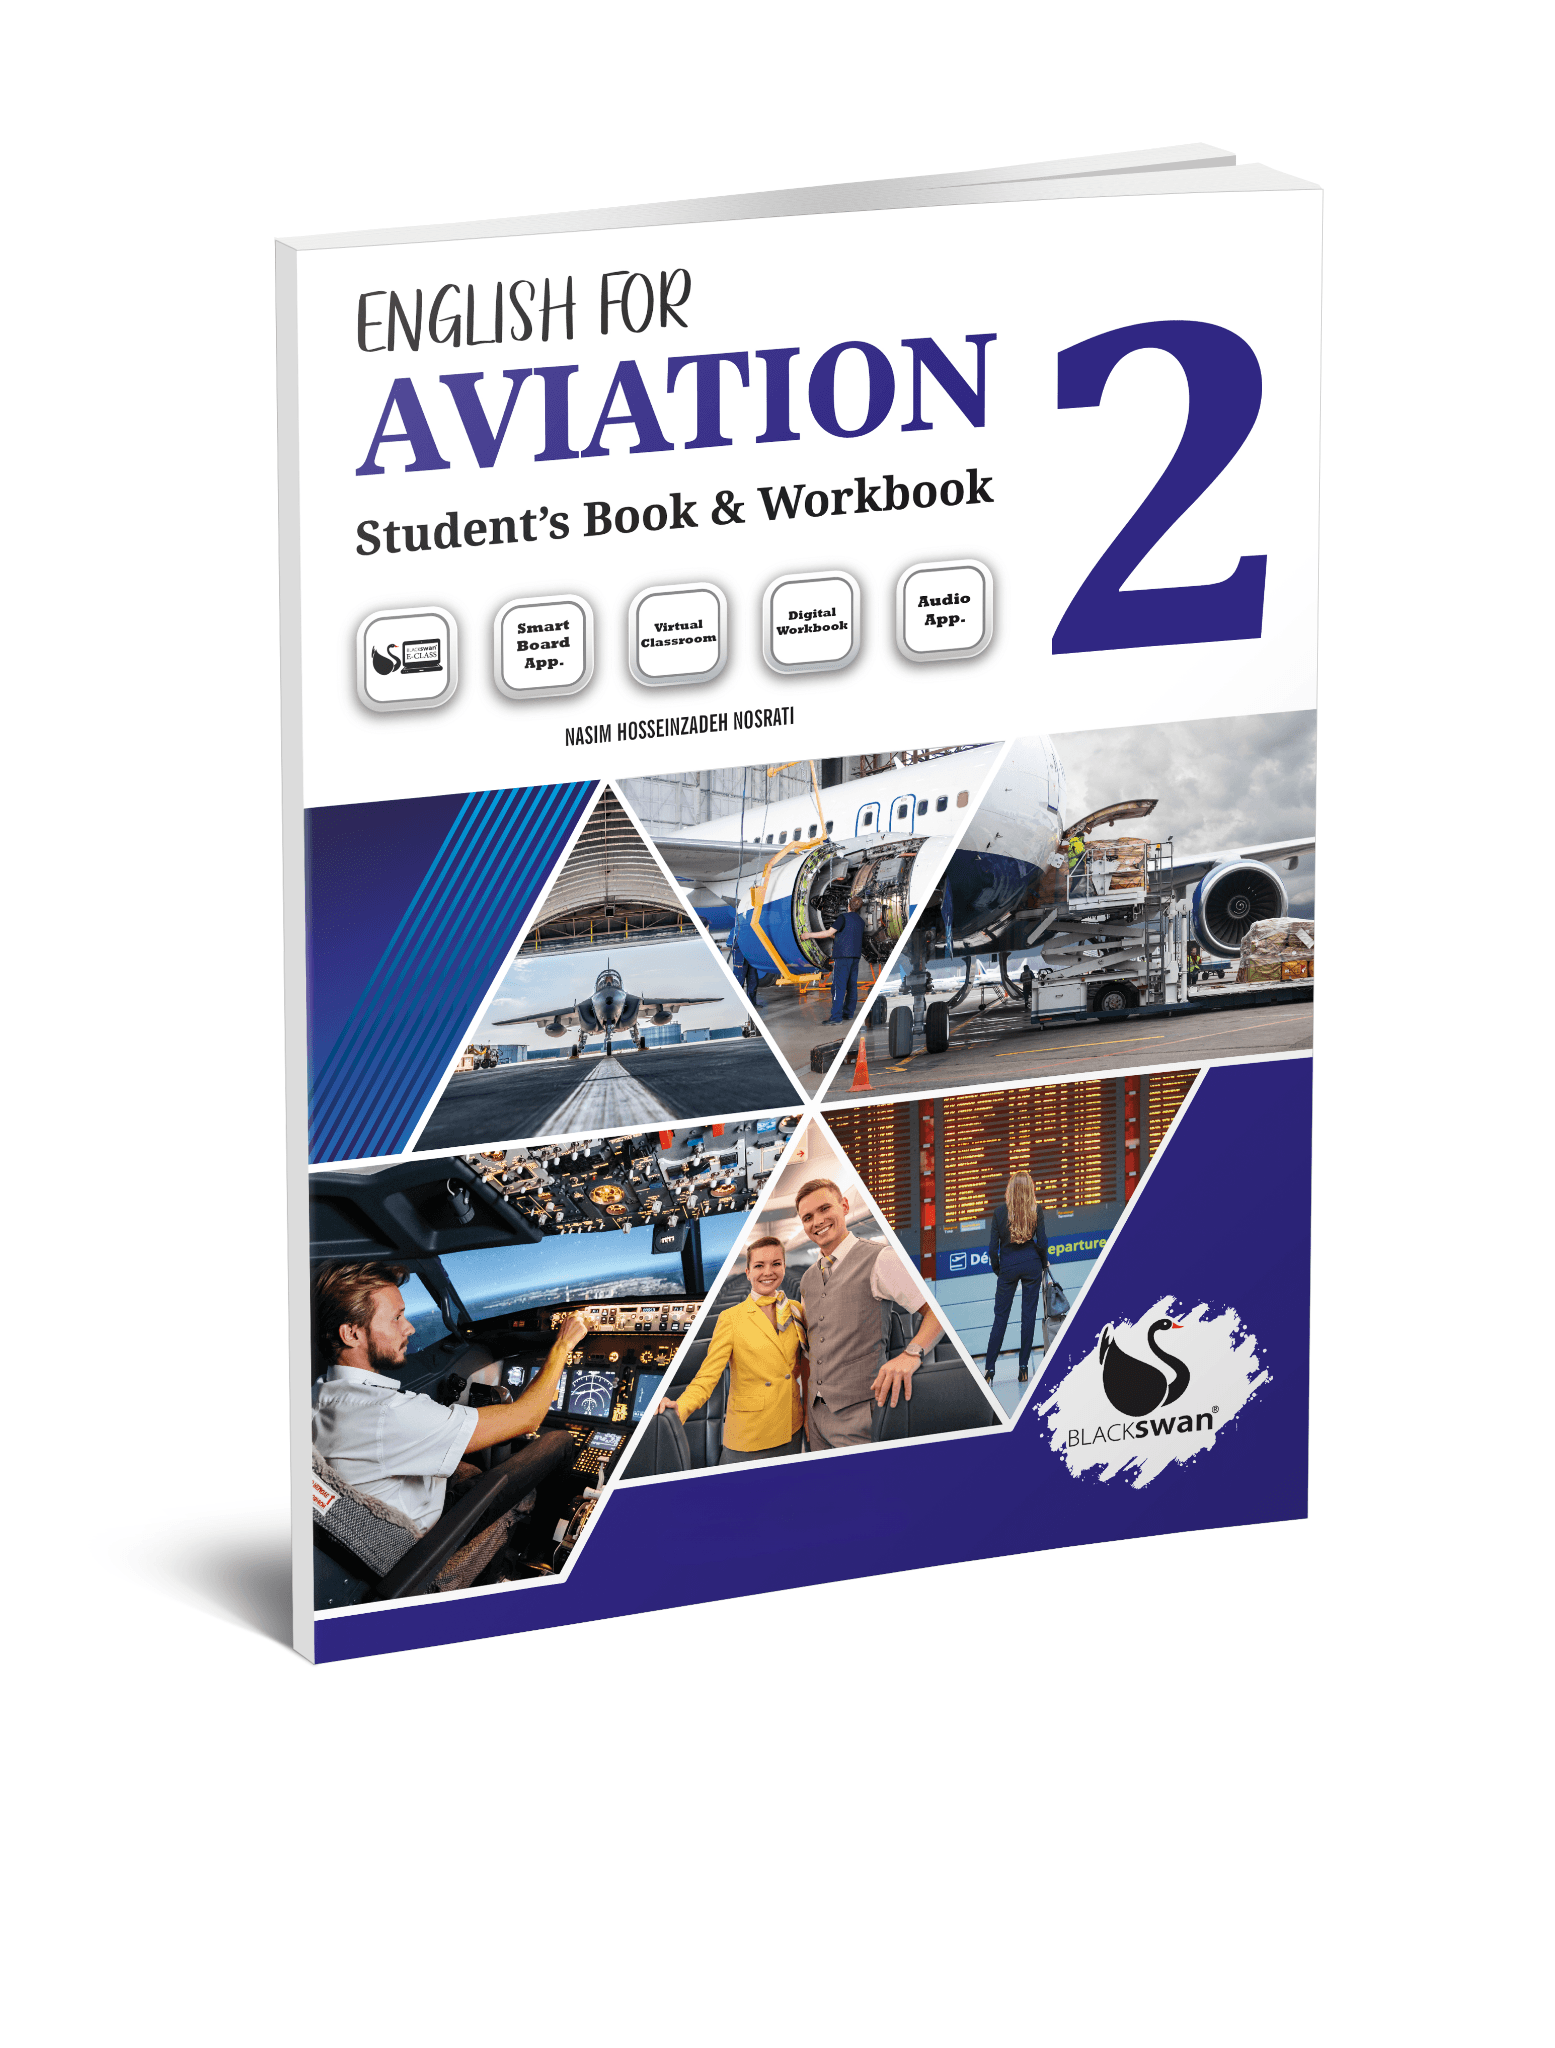 English for Aviation 2 Student's Book & Workbook